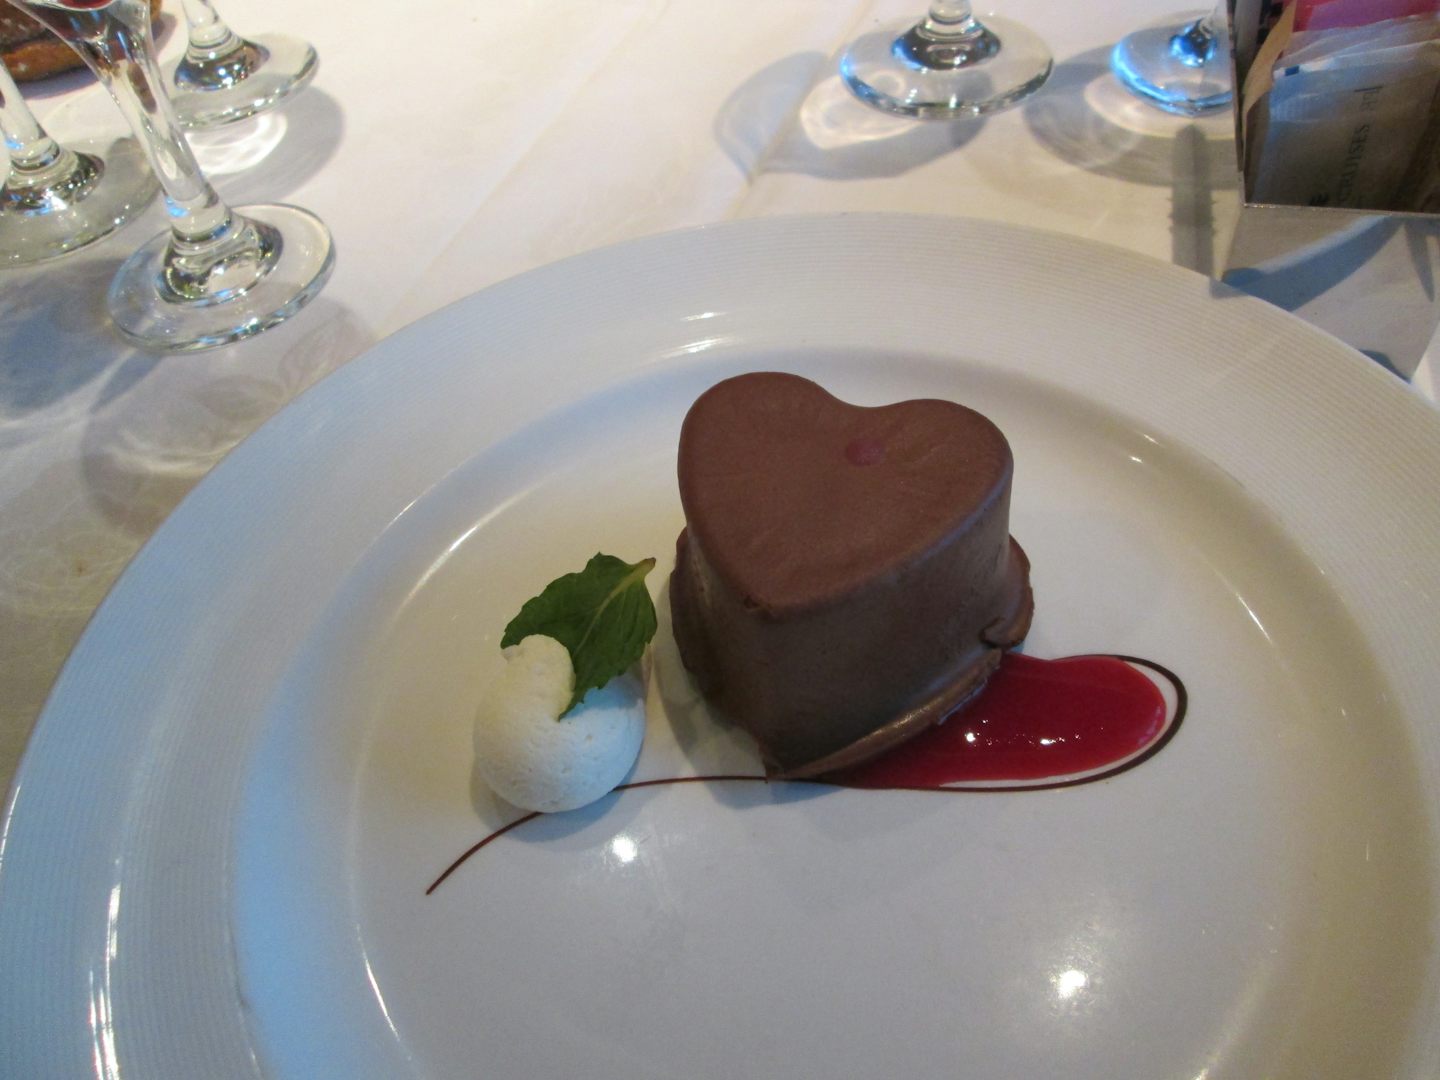 The Love Boat Dream. A delicious chocolate mousse on a thin brownie.